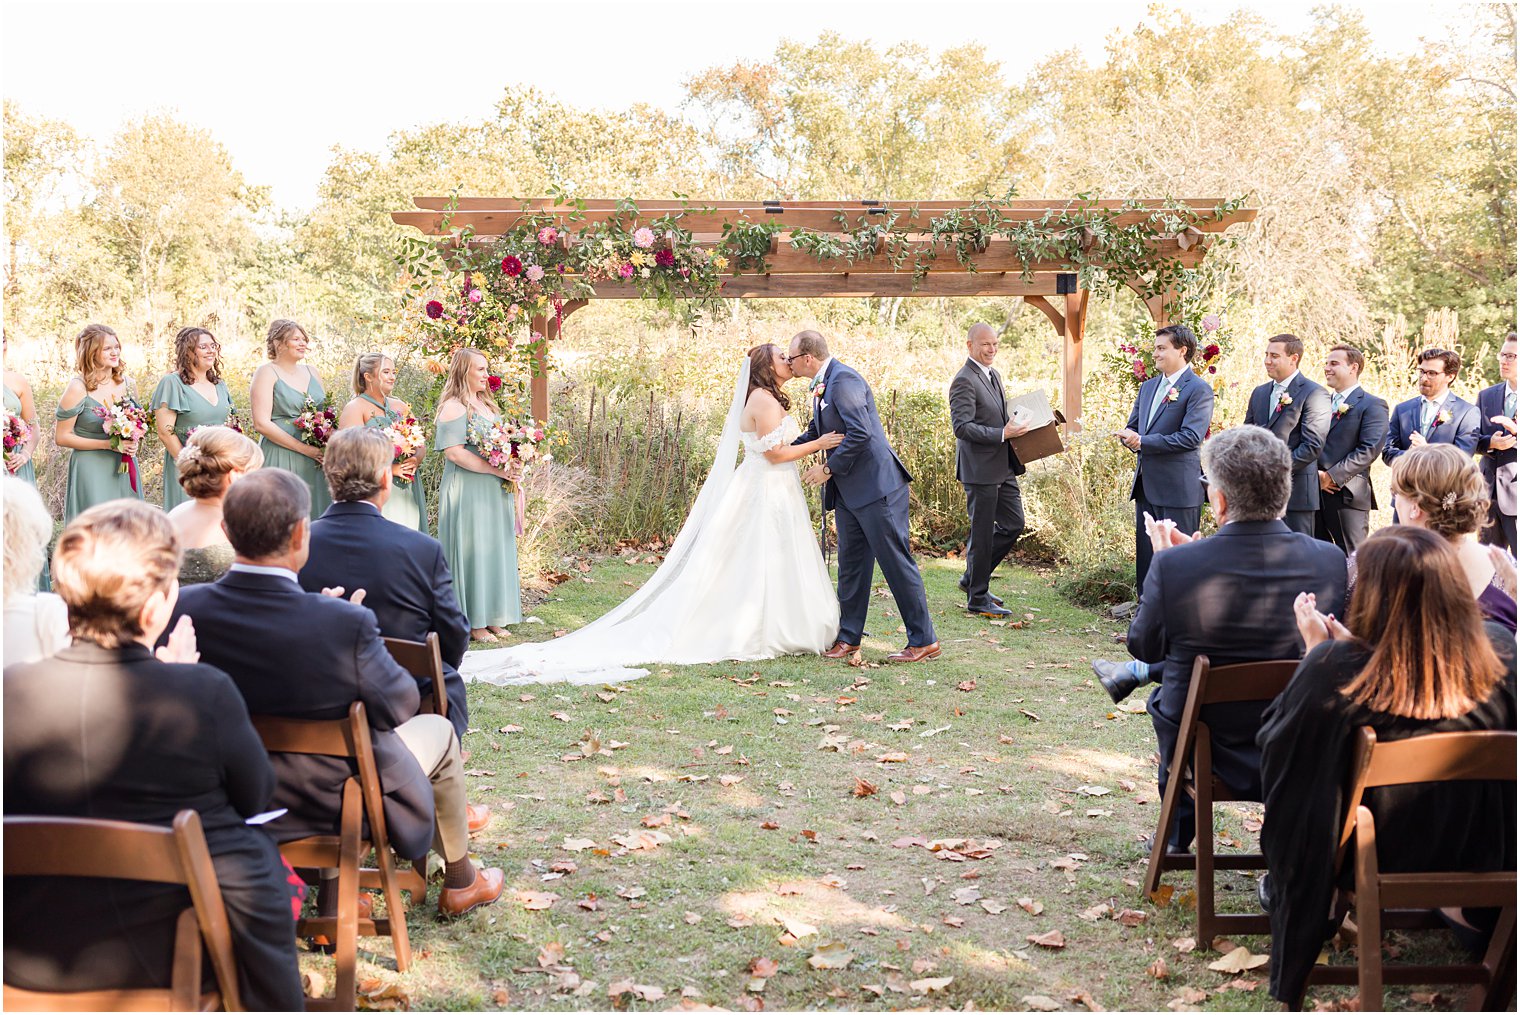 newlyweds kiss under wooden arbor during fall wedding ceremony outdoors on lawn at Bishop Hall Farmstead